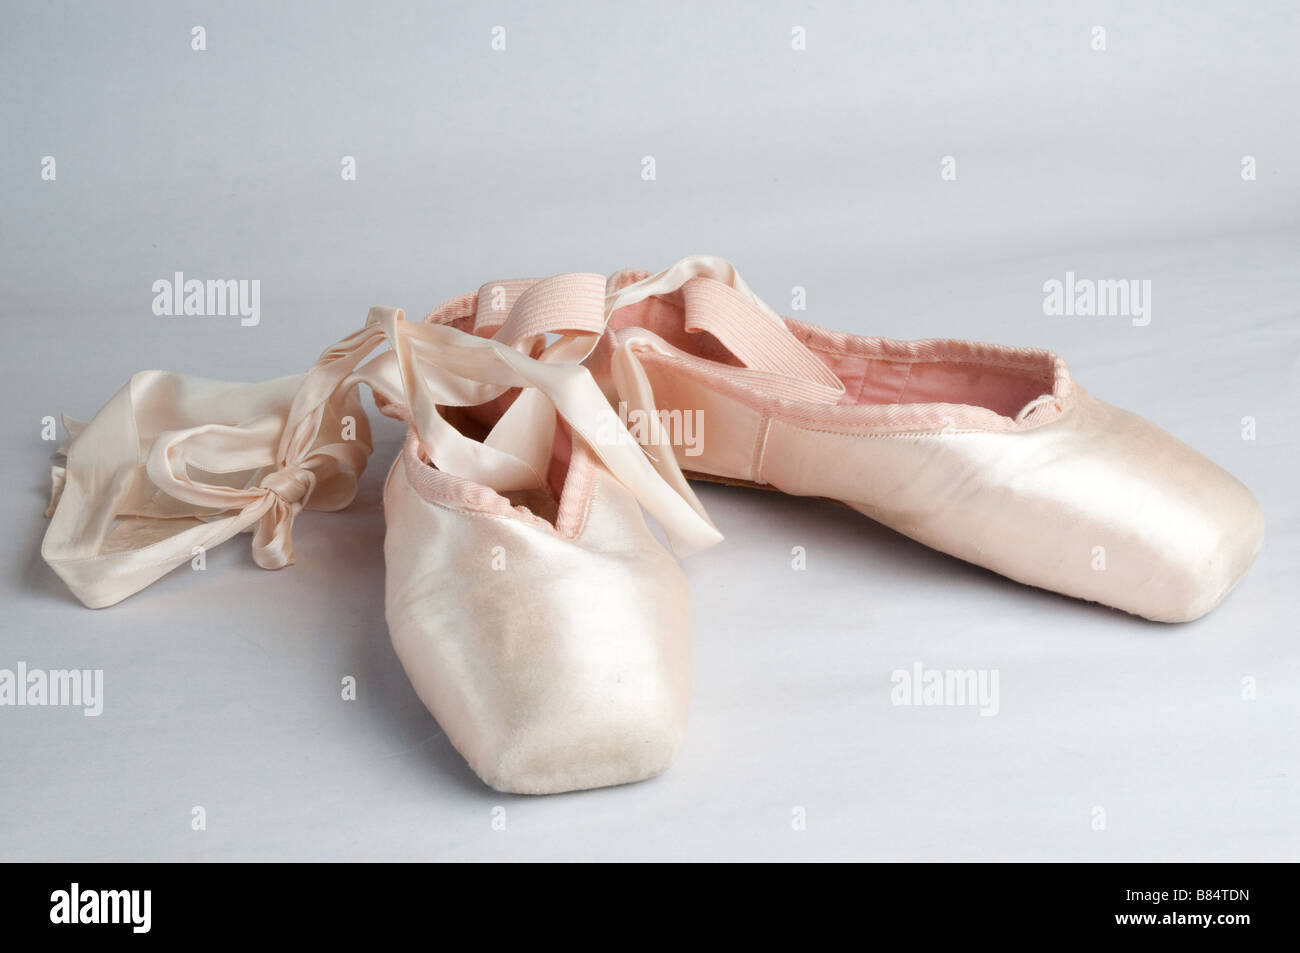 Worn and well used Ballet shoes Stock Photo